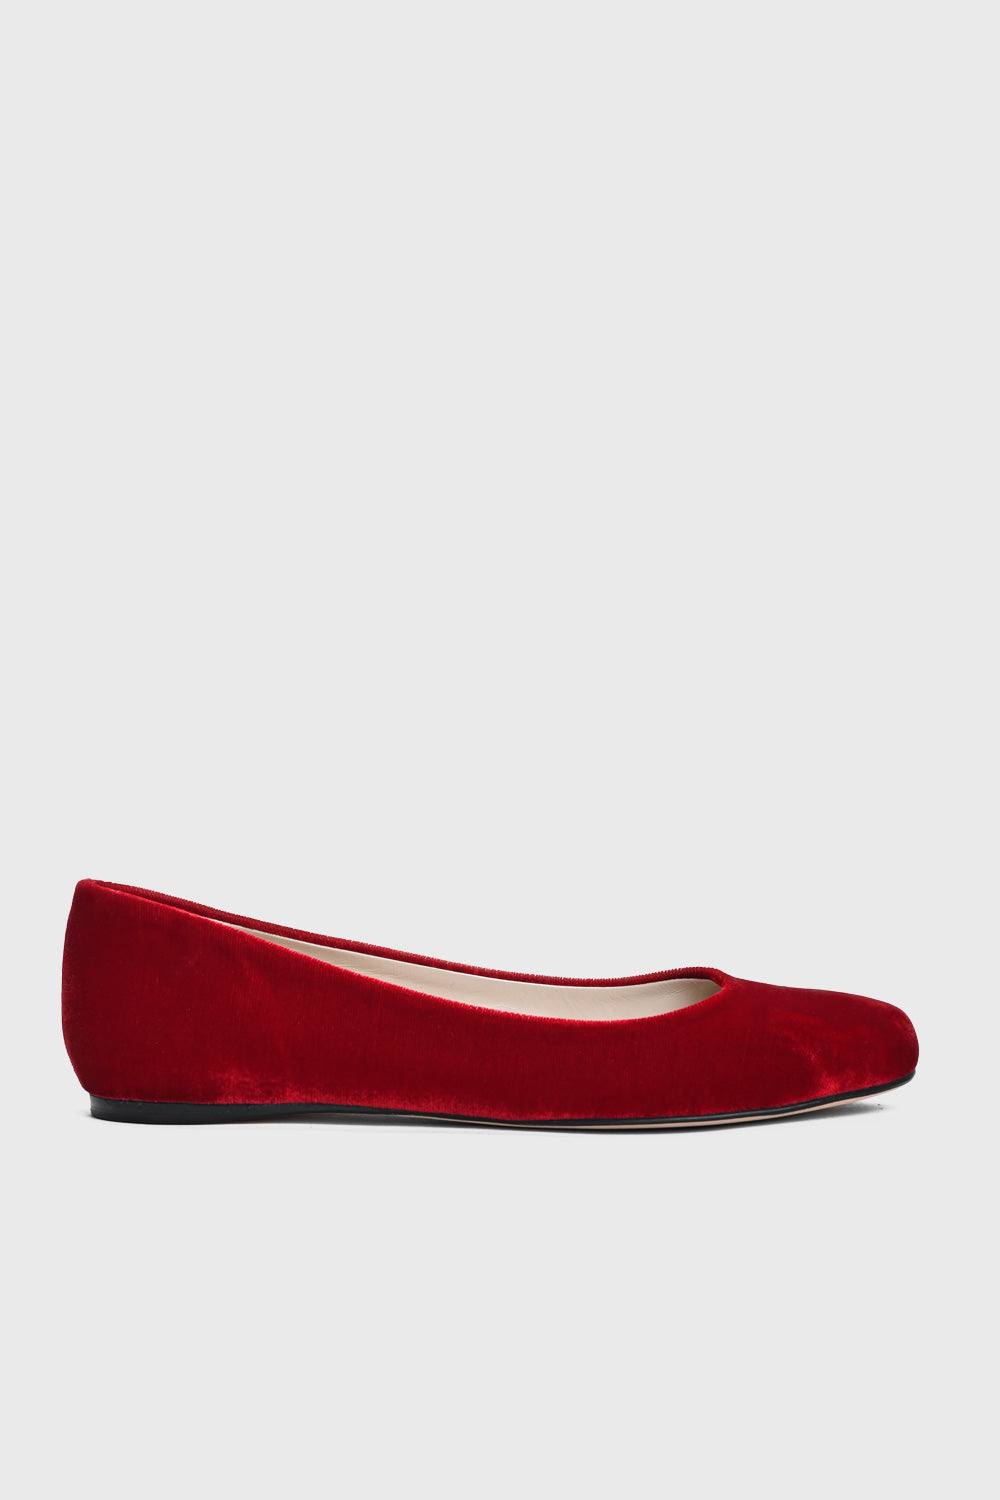 Lucca Sam Shoe - red